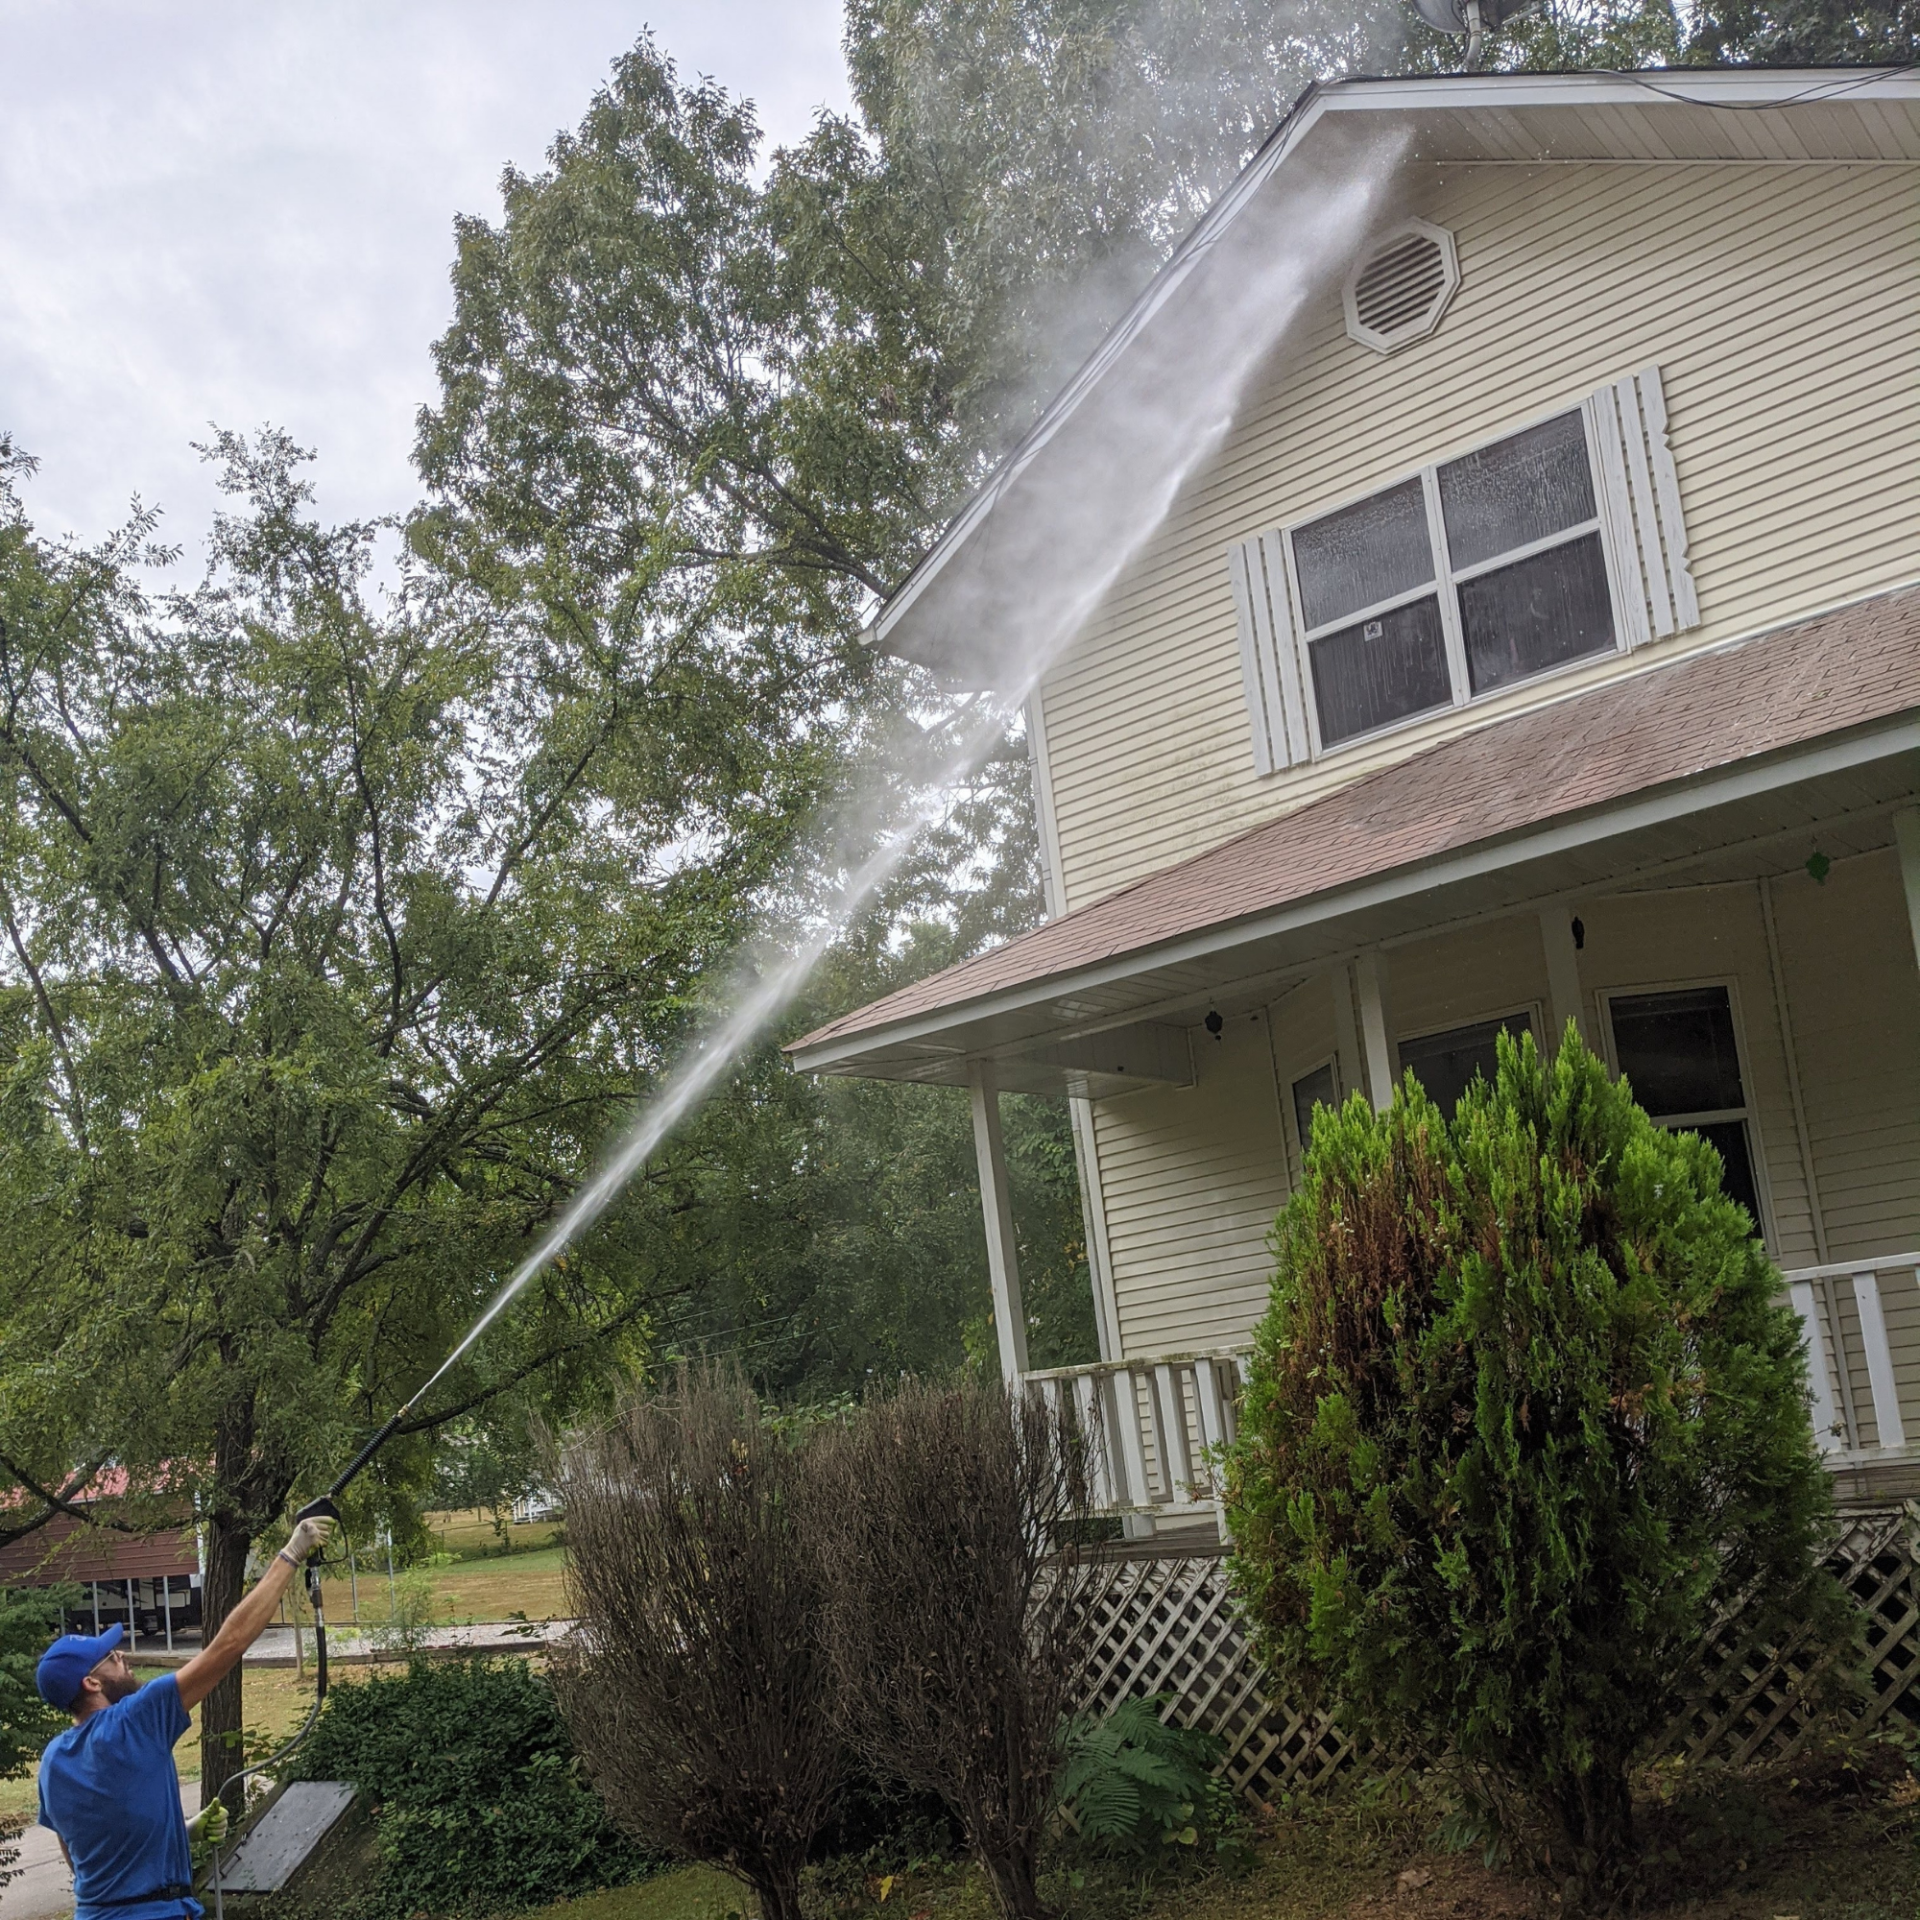 A man is using a high pressure washer to clean the side of a house.